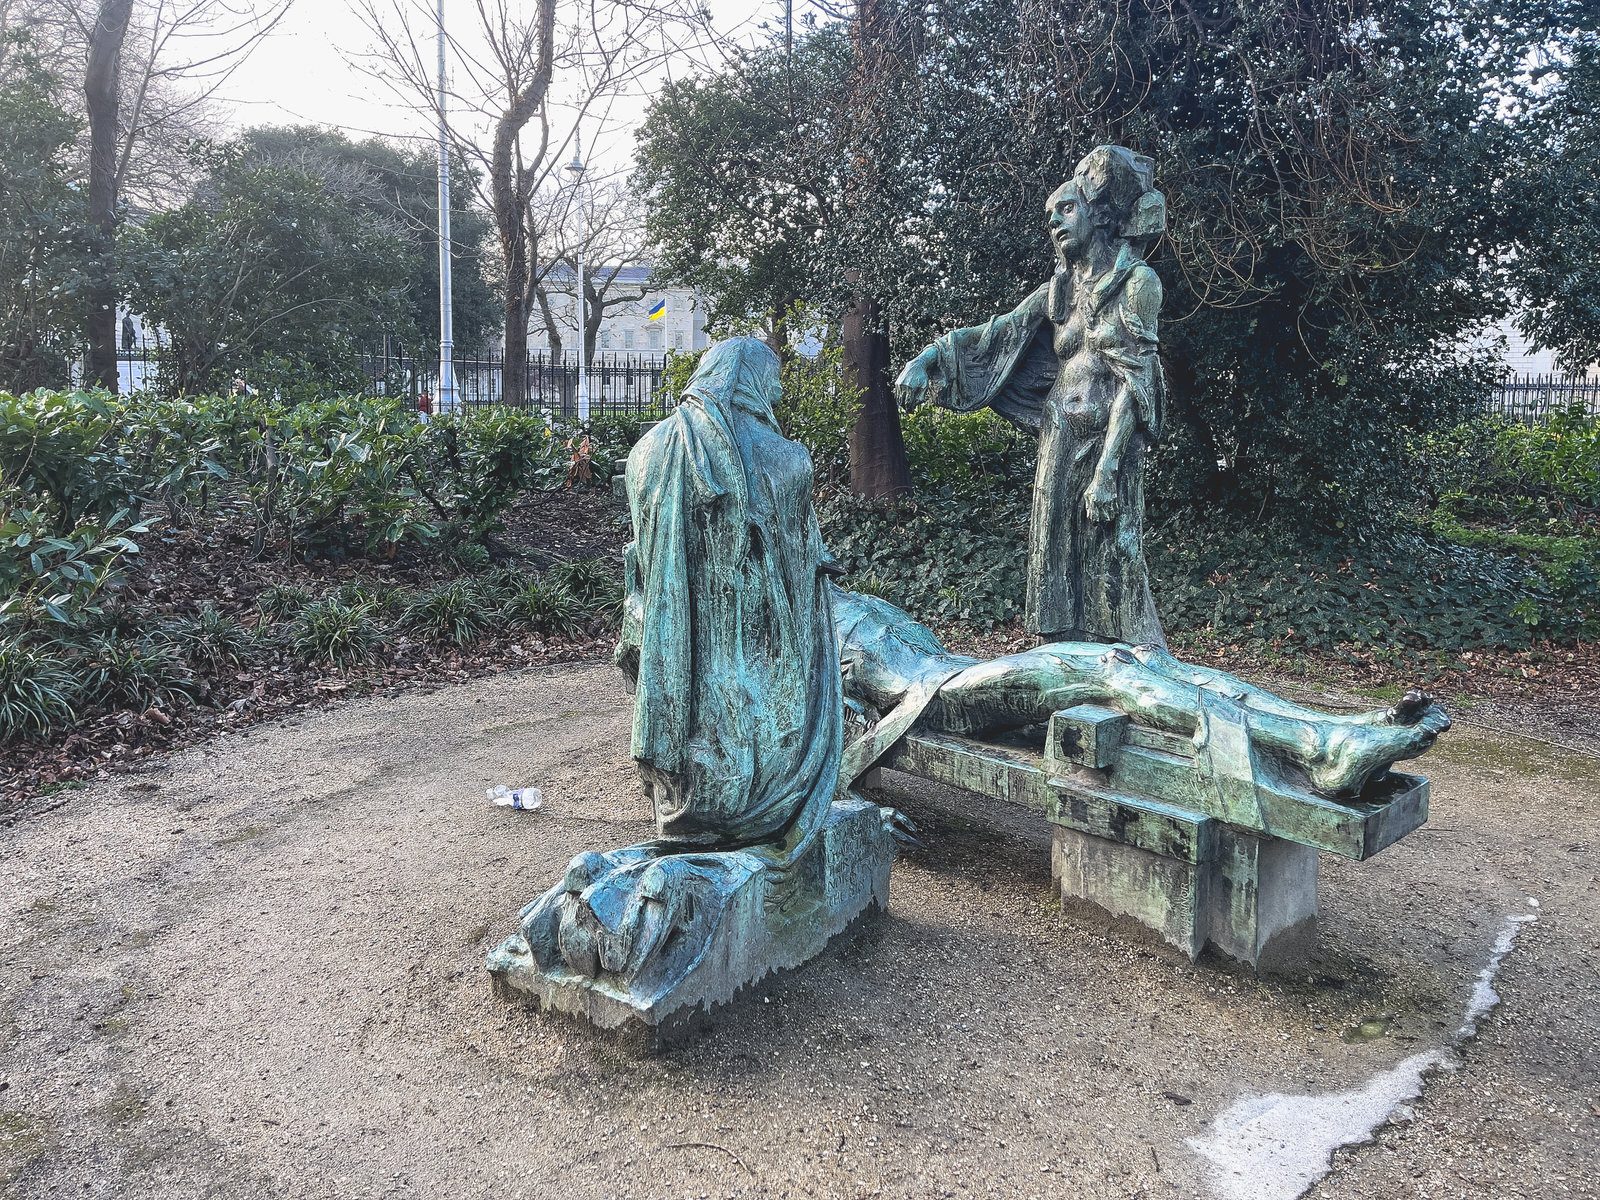 THE VICTIMS BY ANDREW O’CONNOR IN MERRION SQUARE PARK 008